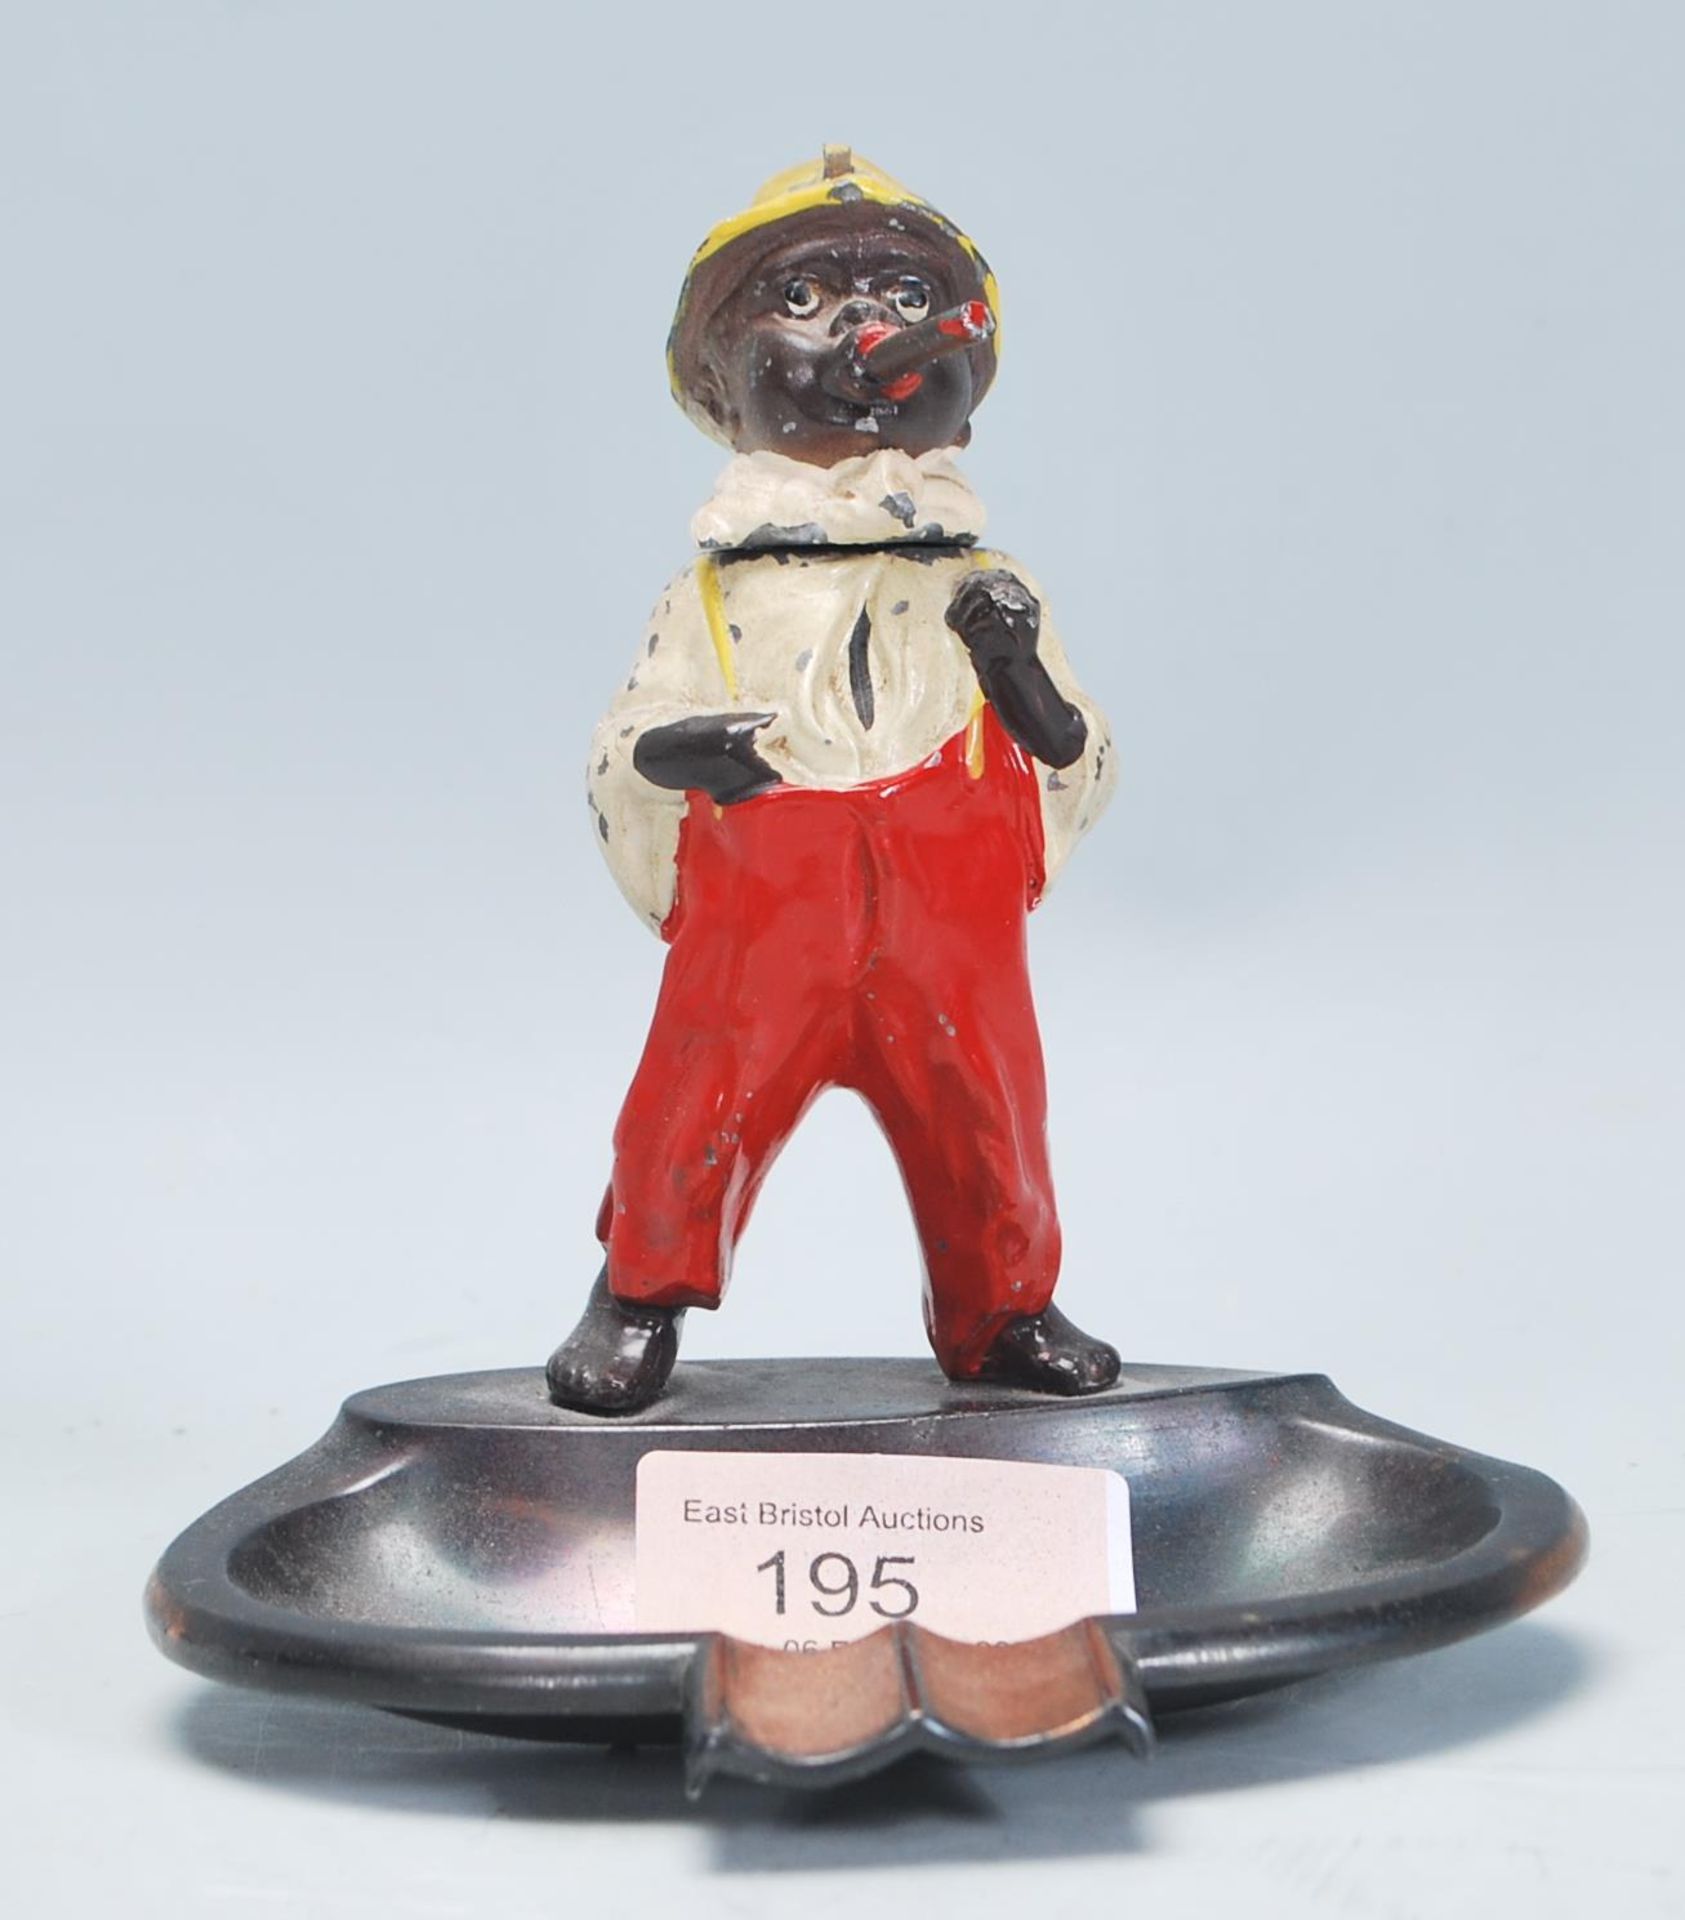 A vintage mid 20th Century novelty ashtray having a cold cast figurine of a boy smoking a cigar with